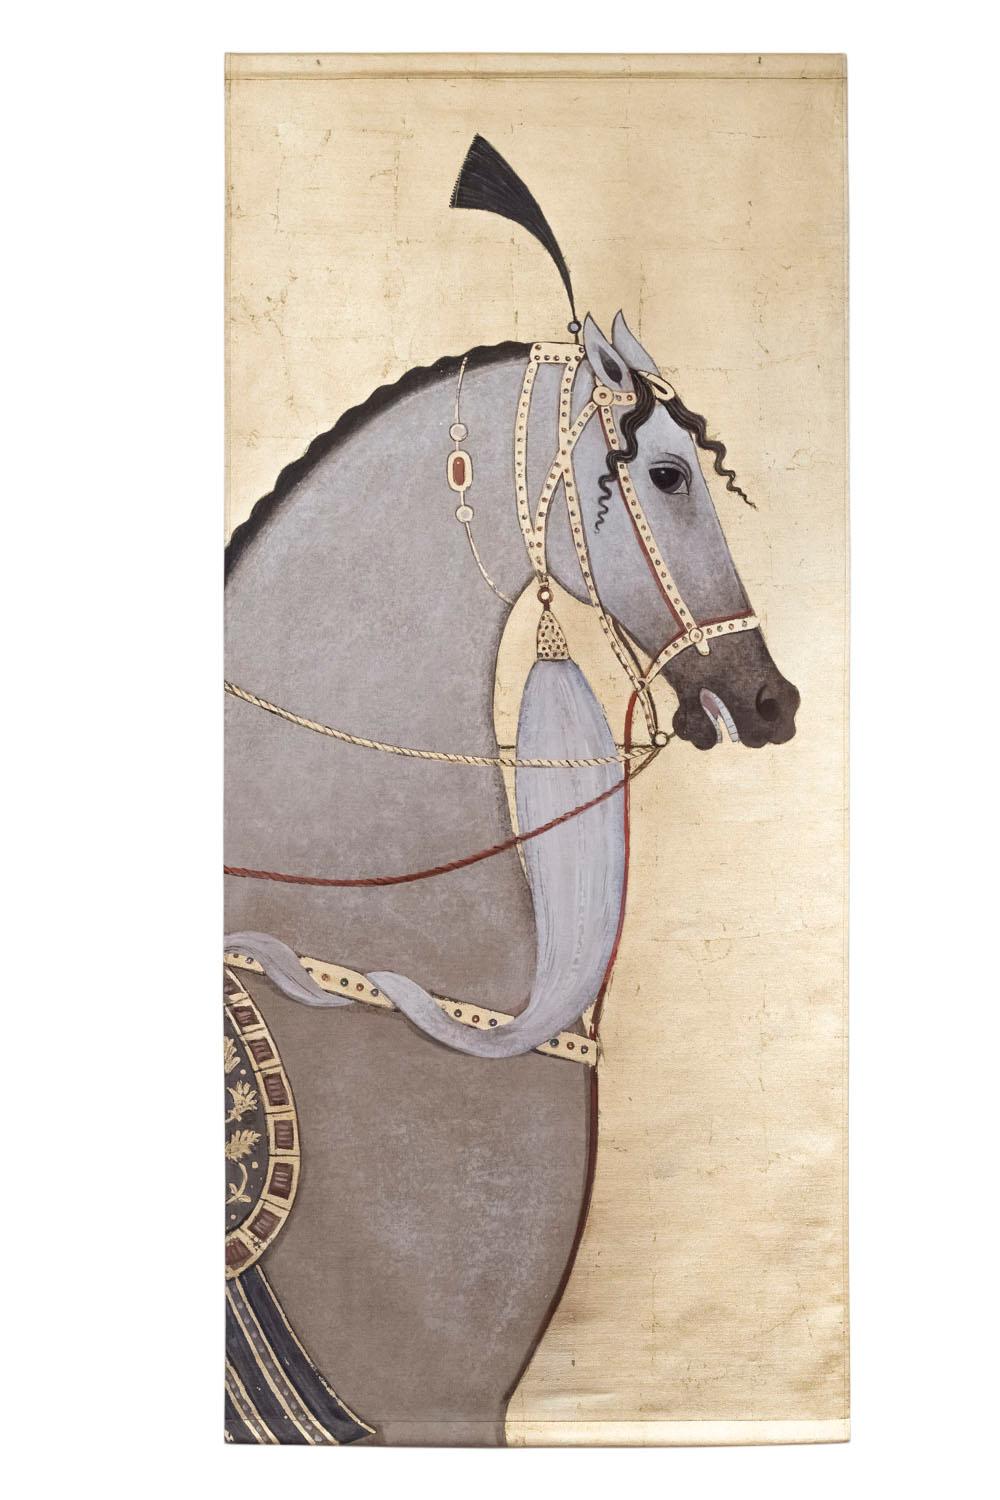 Pair of canvas figuring grey Arabian horses on a gilt background. On each canvas, a profile of a grey horse head with a darker wavy mane, wearing a harness decorated with stones and duster on head. They wear saddle pads with gilt foliage motifs on a